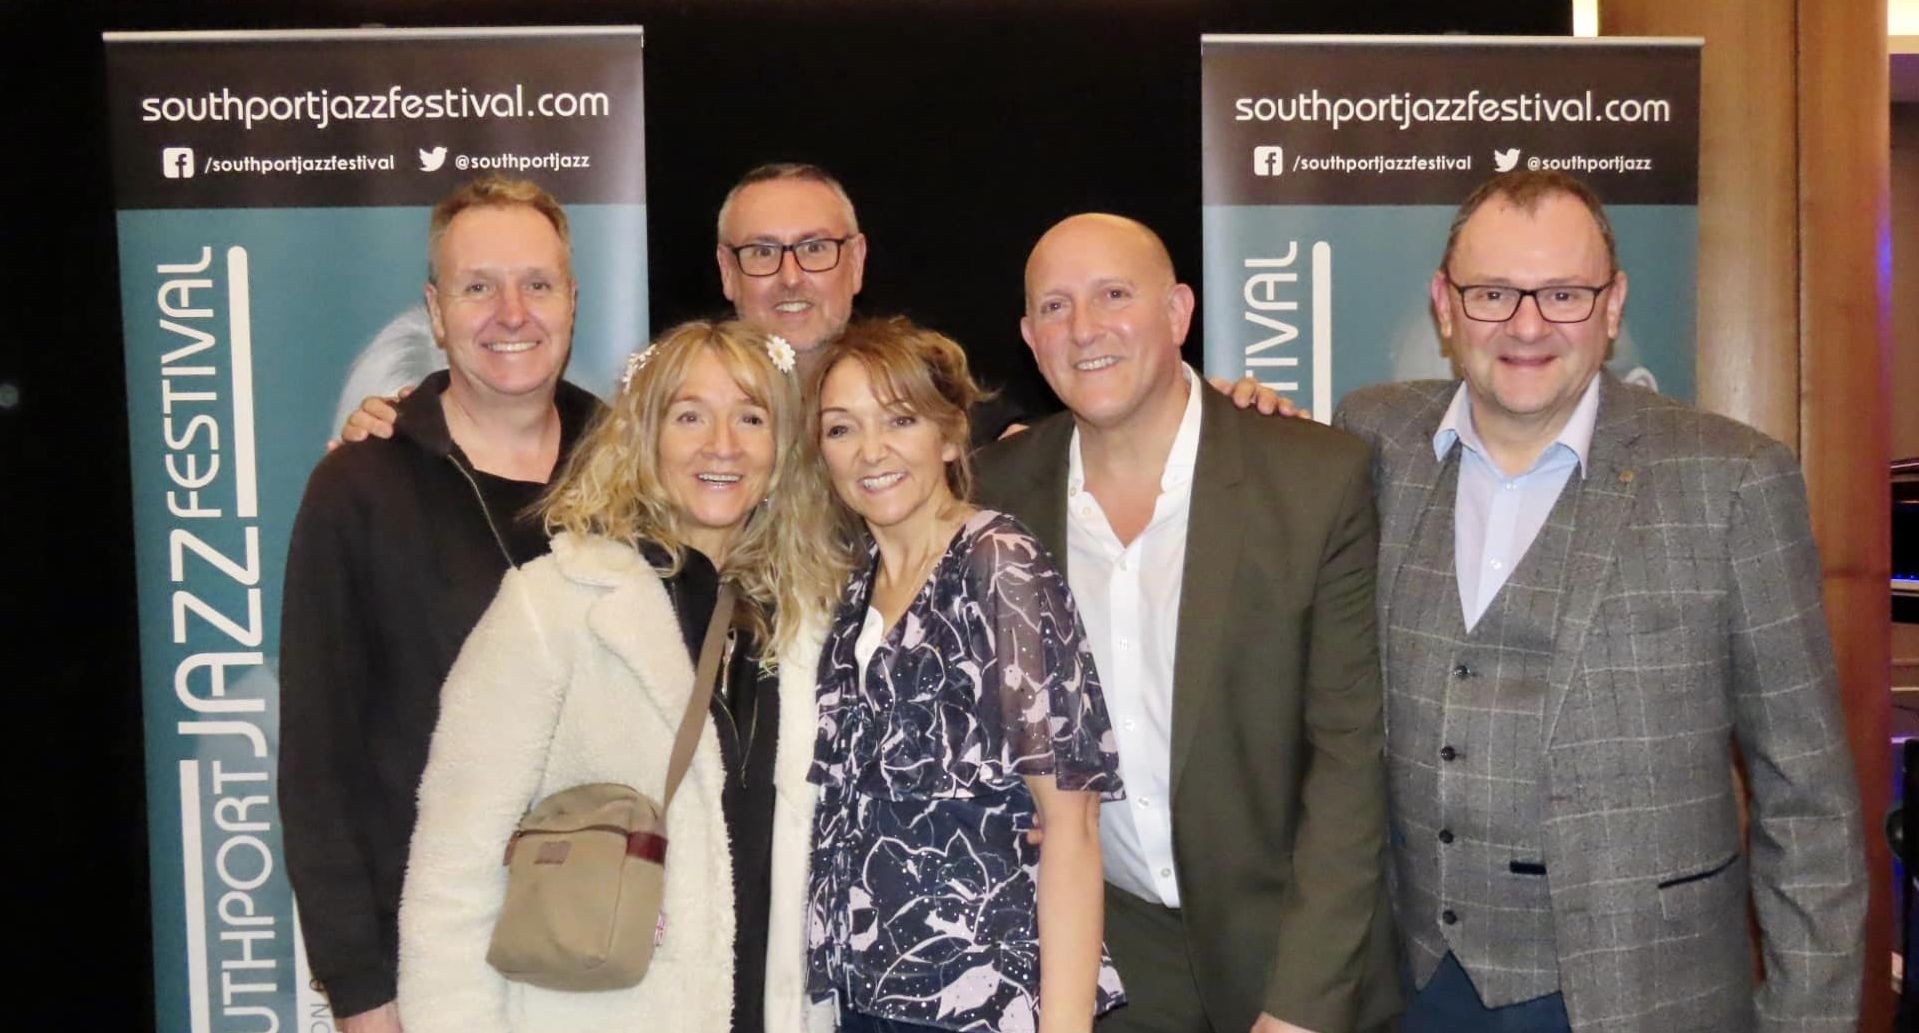 Jeremy Sassoon's MOJO, Musicians Of Jewish Origin, with Festival Directors Jez Murphy and Emma Holcroft at Southport Jazz Festival. Photo by Andrew Brown Media